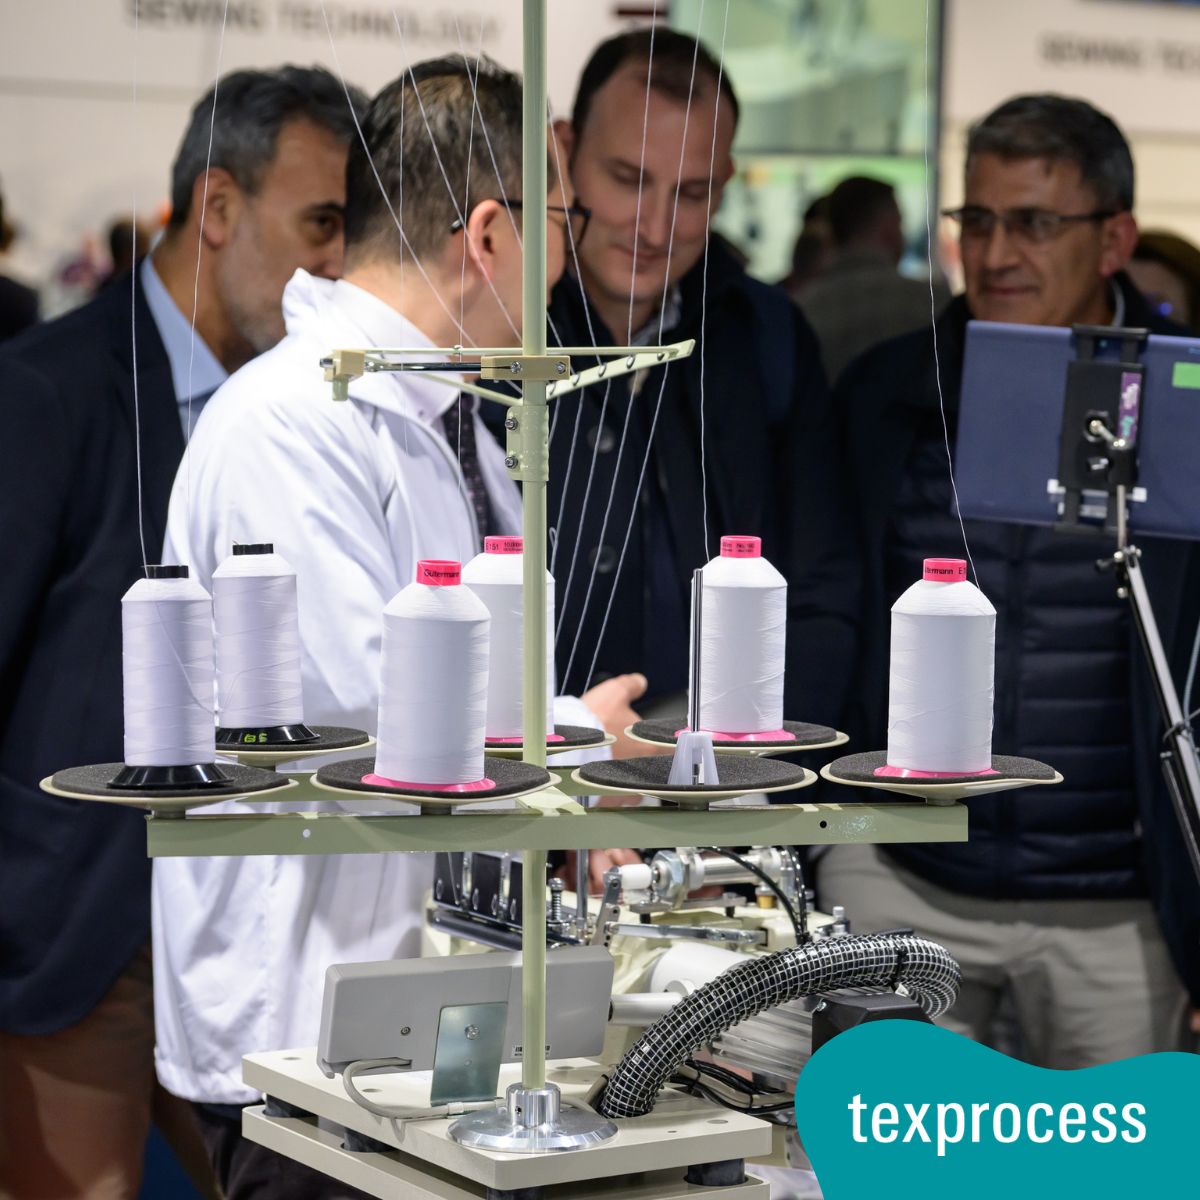 Advanced sewing technologies are revolutionizing textile production with specialized machines and automated features, enhancing efficiency and creativity. Discover more about these innovations at texprocess.com 🧶🪡⚙️ #texprocess #sewing #technologies #digitalisation